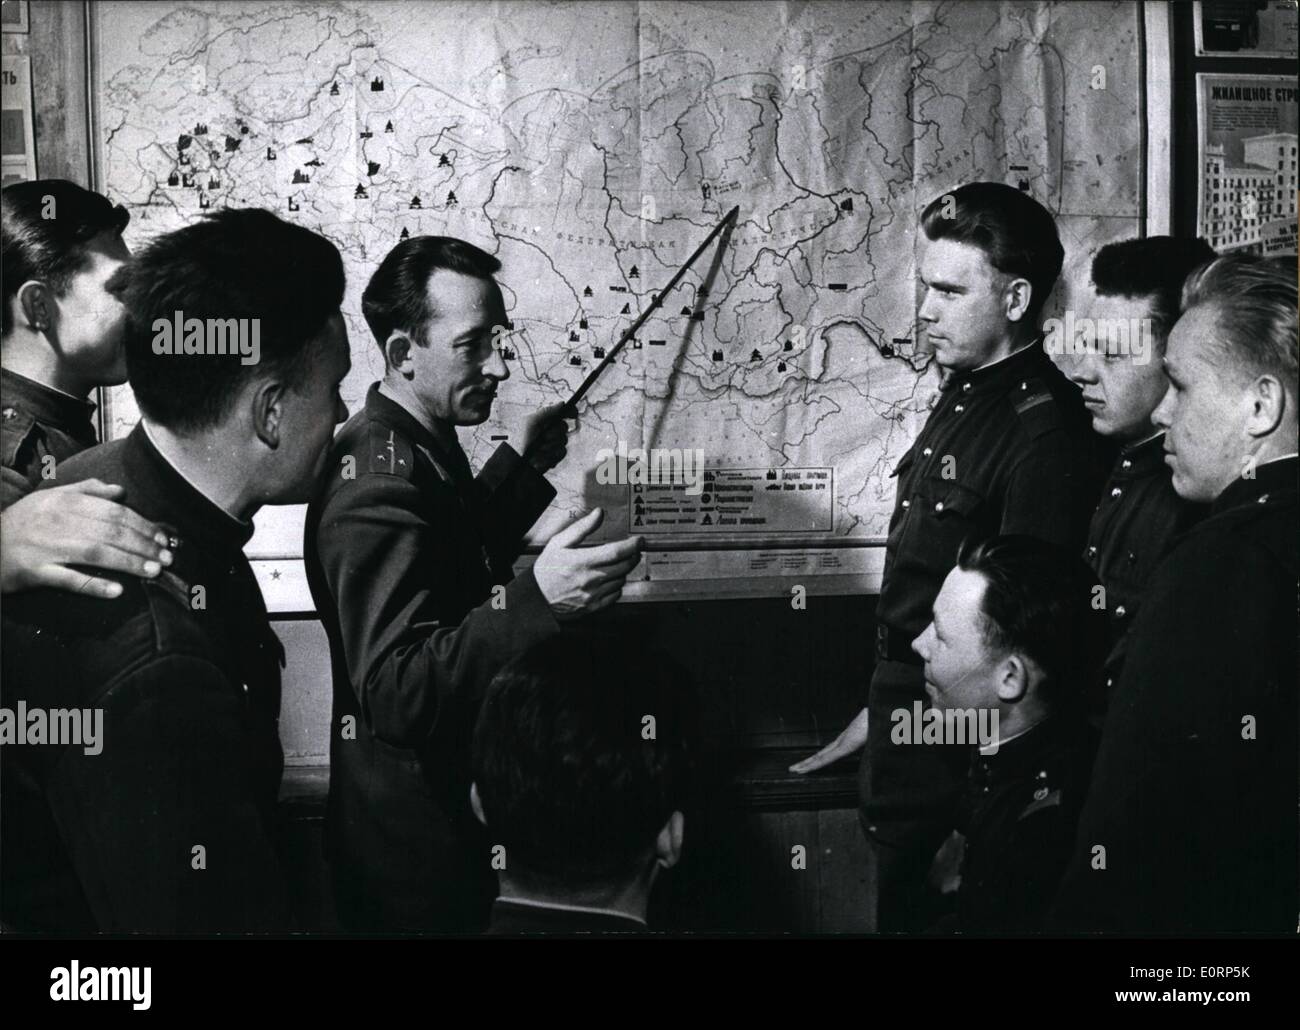 Apr. 04, 1960 - The first of 1.2 millions soldier... are being released according to Chruschtschow's plan of reducing the Soviet armed forces and using them for economical purposes. Photo Shows: Captain A. Andreen (Andreen) showing the first of the demobilized soldiers where they will probably work in future in the Soviet Union. Stock Photo